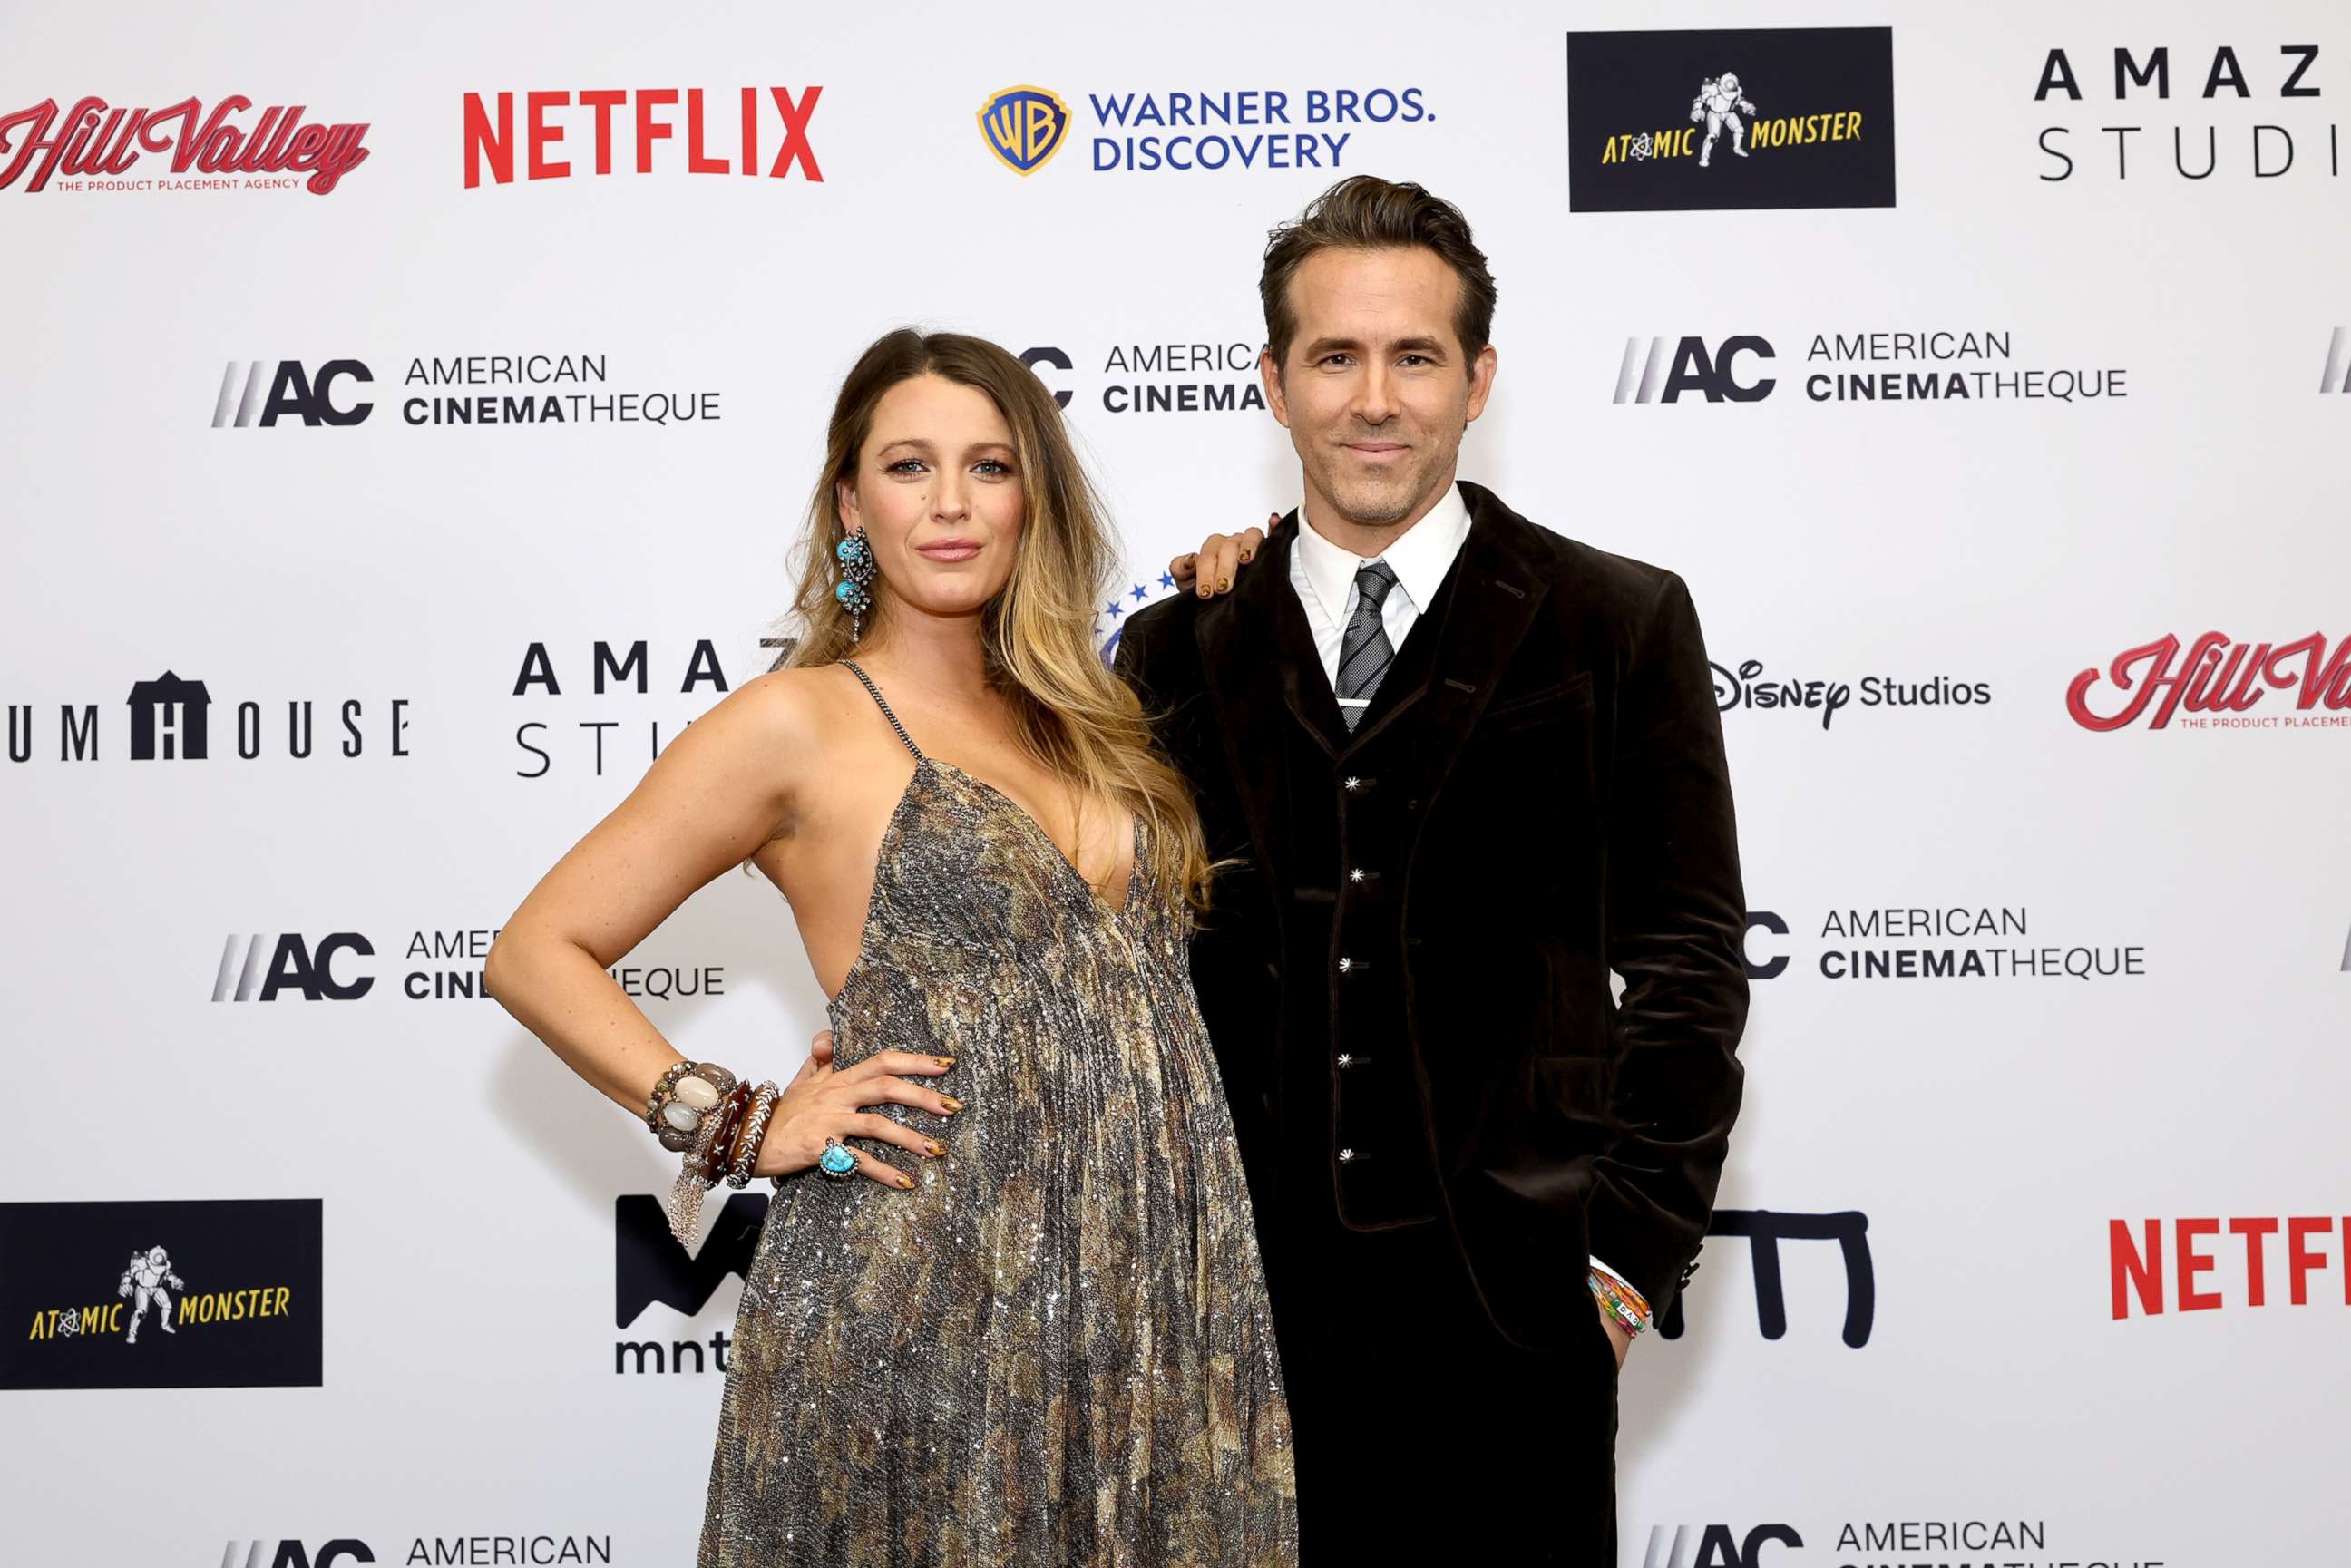 PHOTO: Blake Lively and Honoree Ryan Reynolds attend the 36th Annual American Cinematheque Awards at The Beverly Hilton, Nov. 17, 2022, in Beverly Hills, Calif.